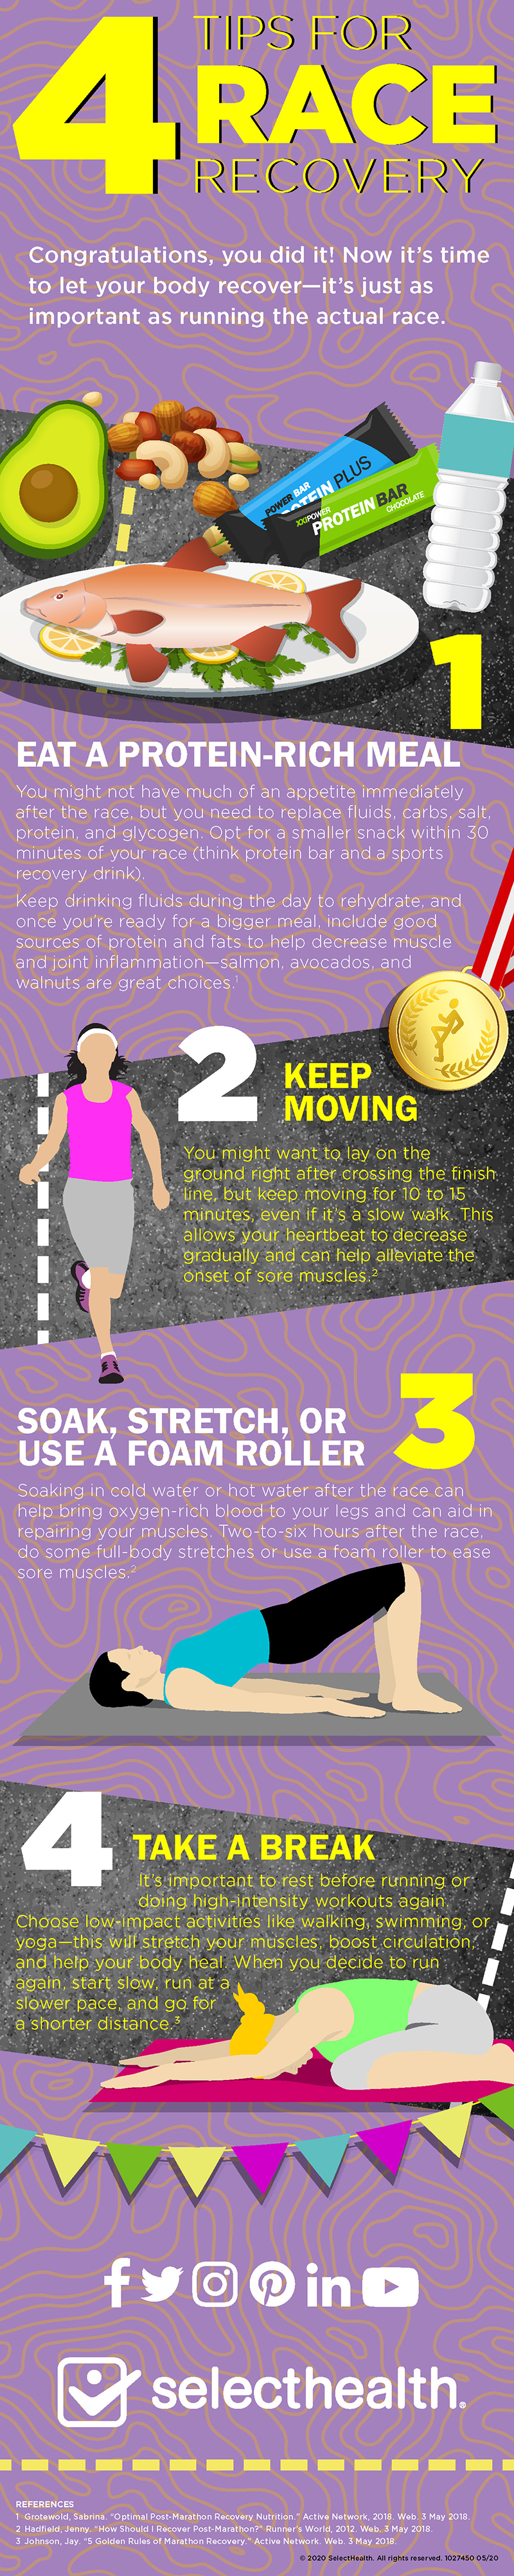 How to recover after running a race, infographic